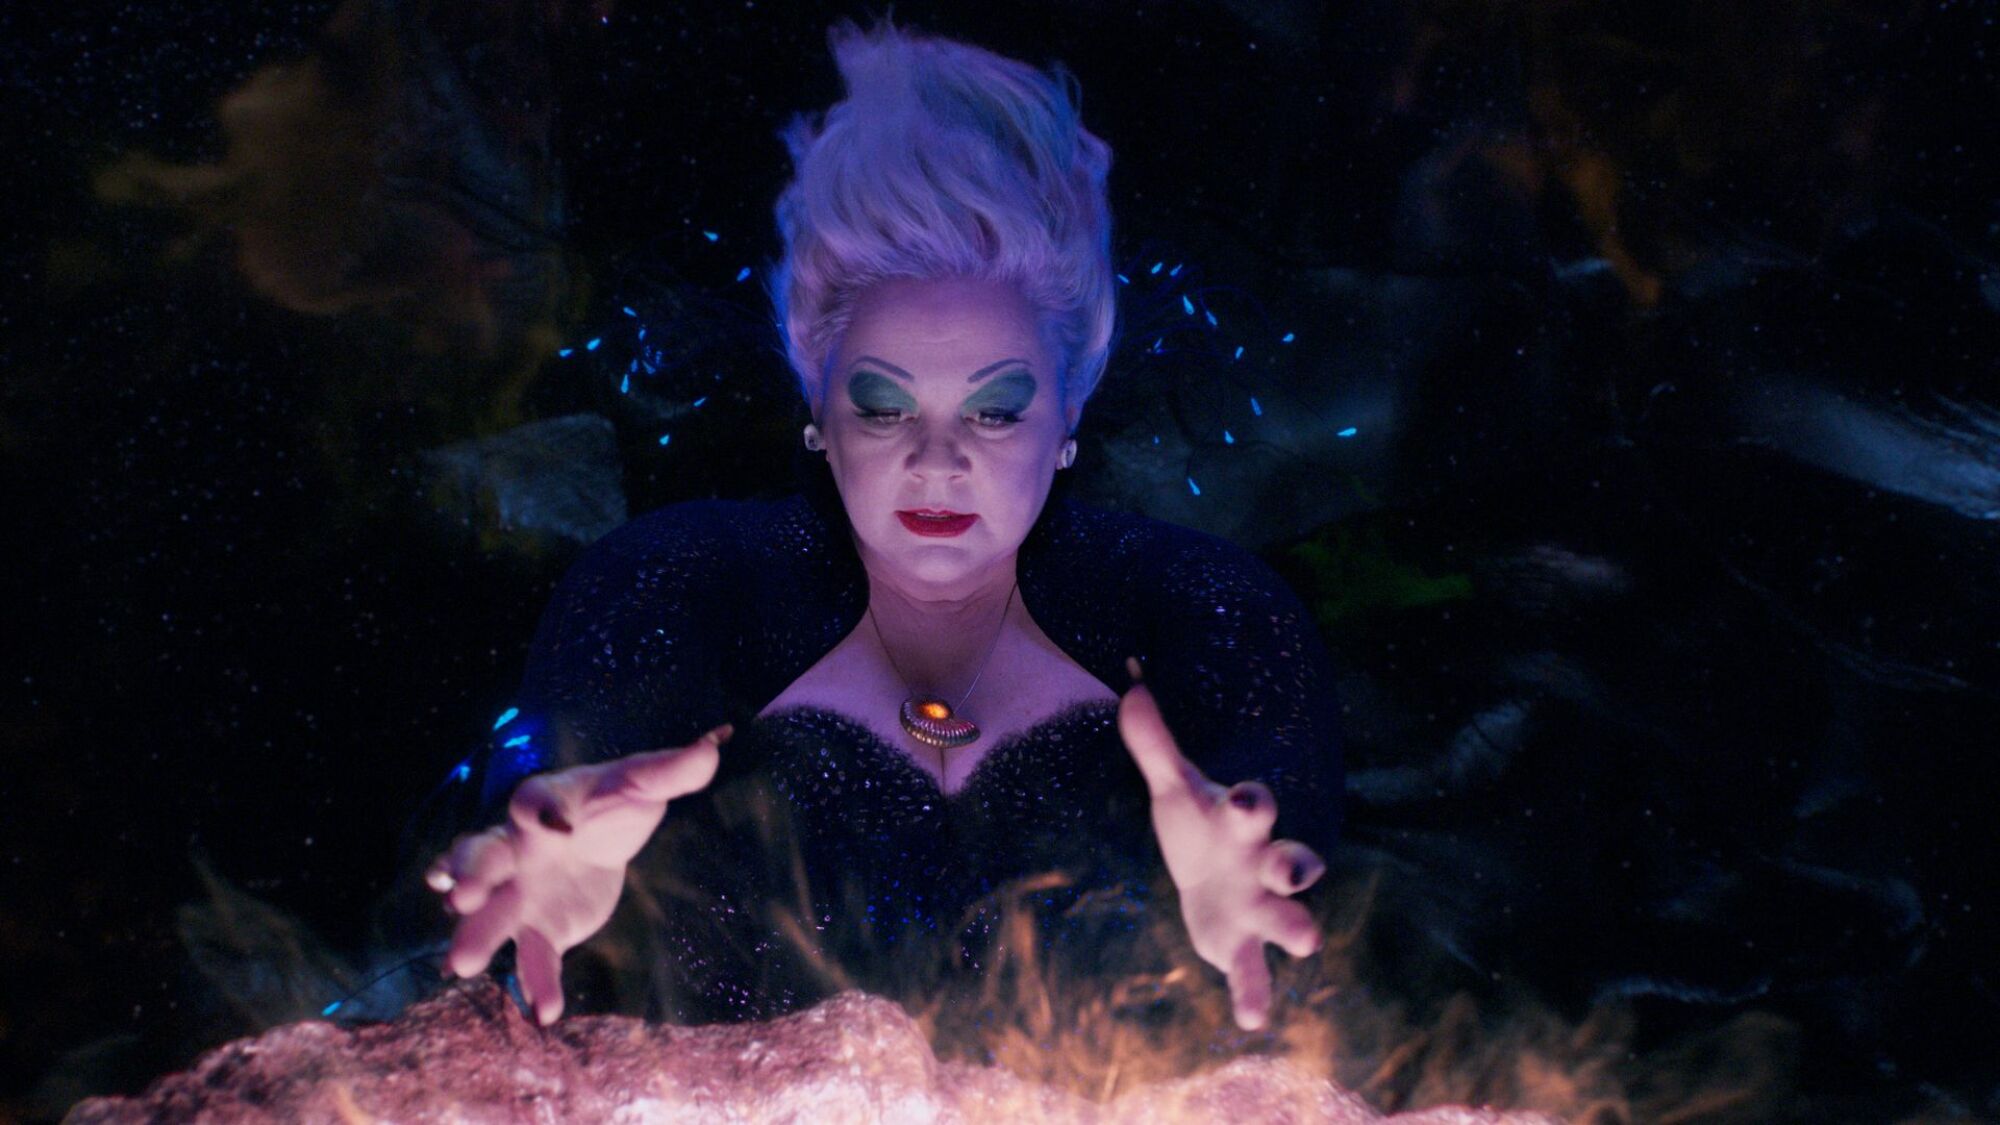 Melissa McCarthy as Ursula the sea witch in the live-action remake, "The Little Mermaid."